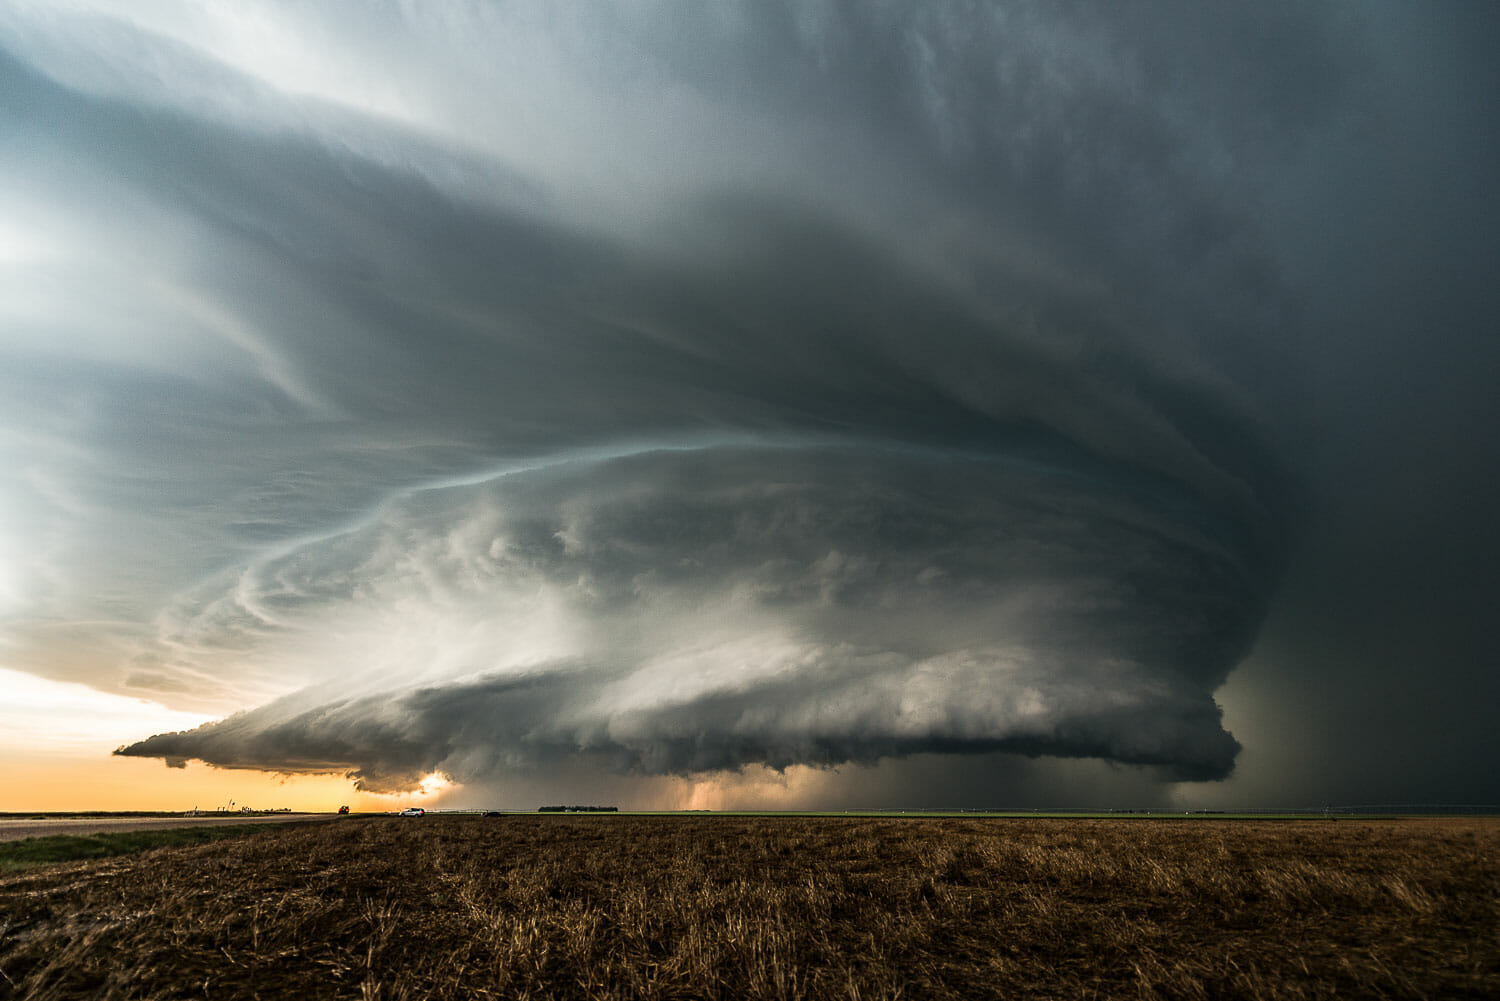 A massive supercell thunderstorm looms over open plains at sunset.